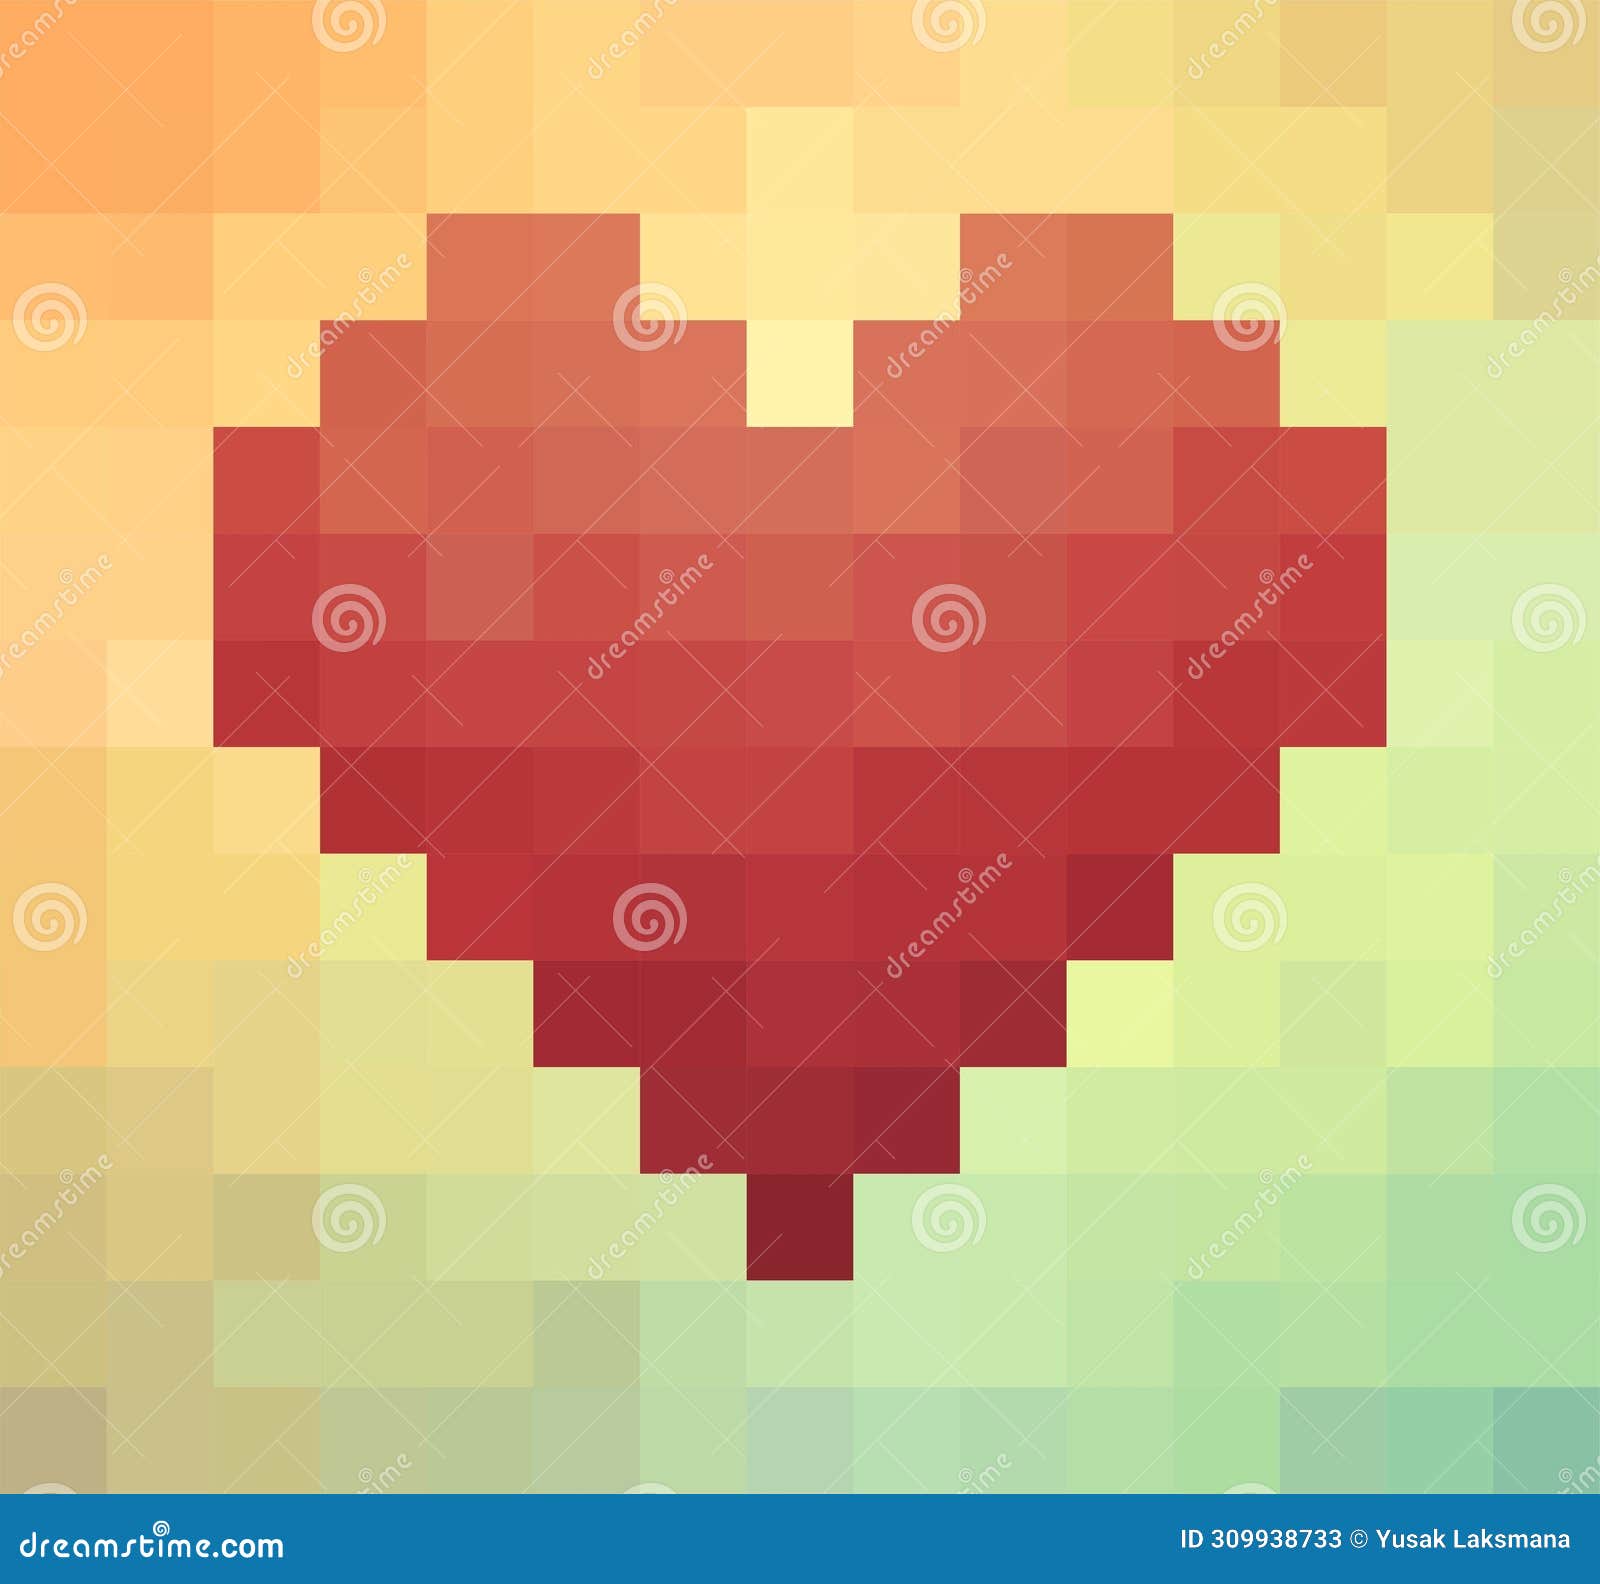 hearts pixel on pixellated background.